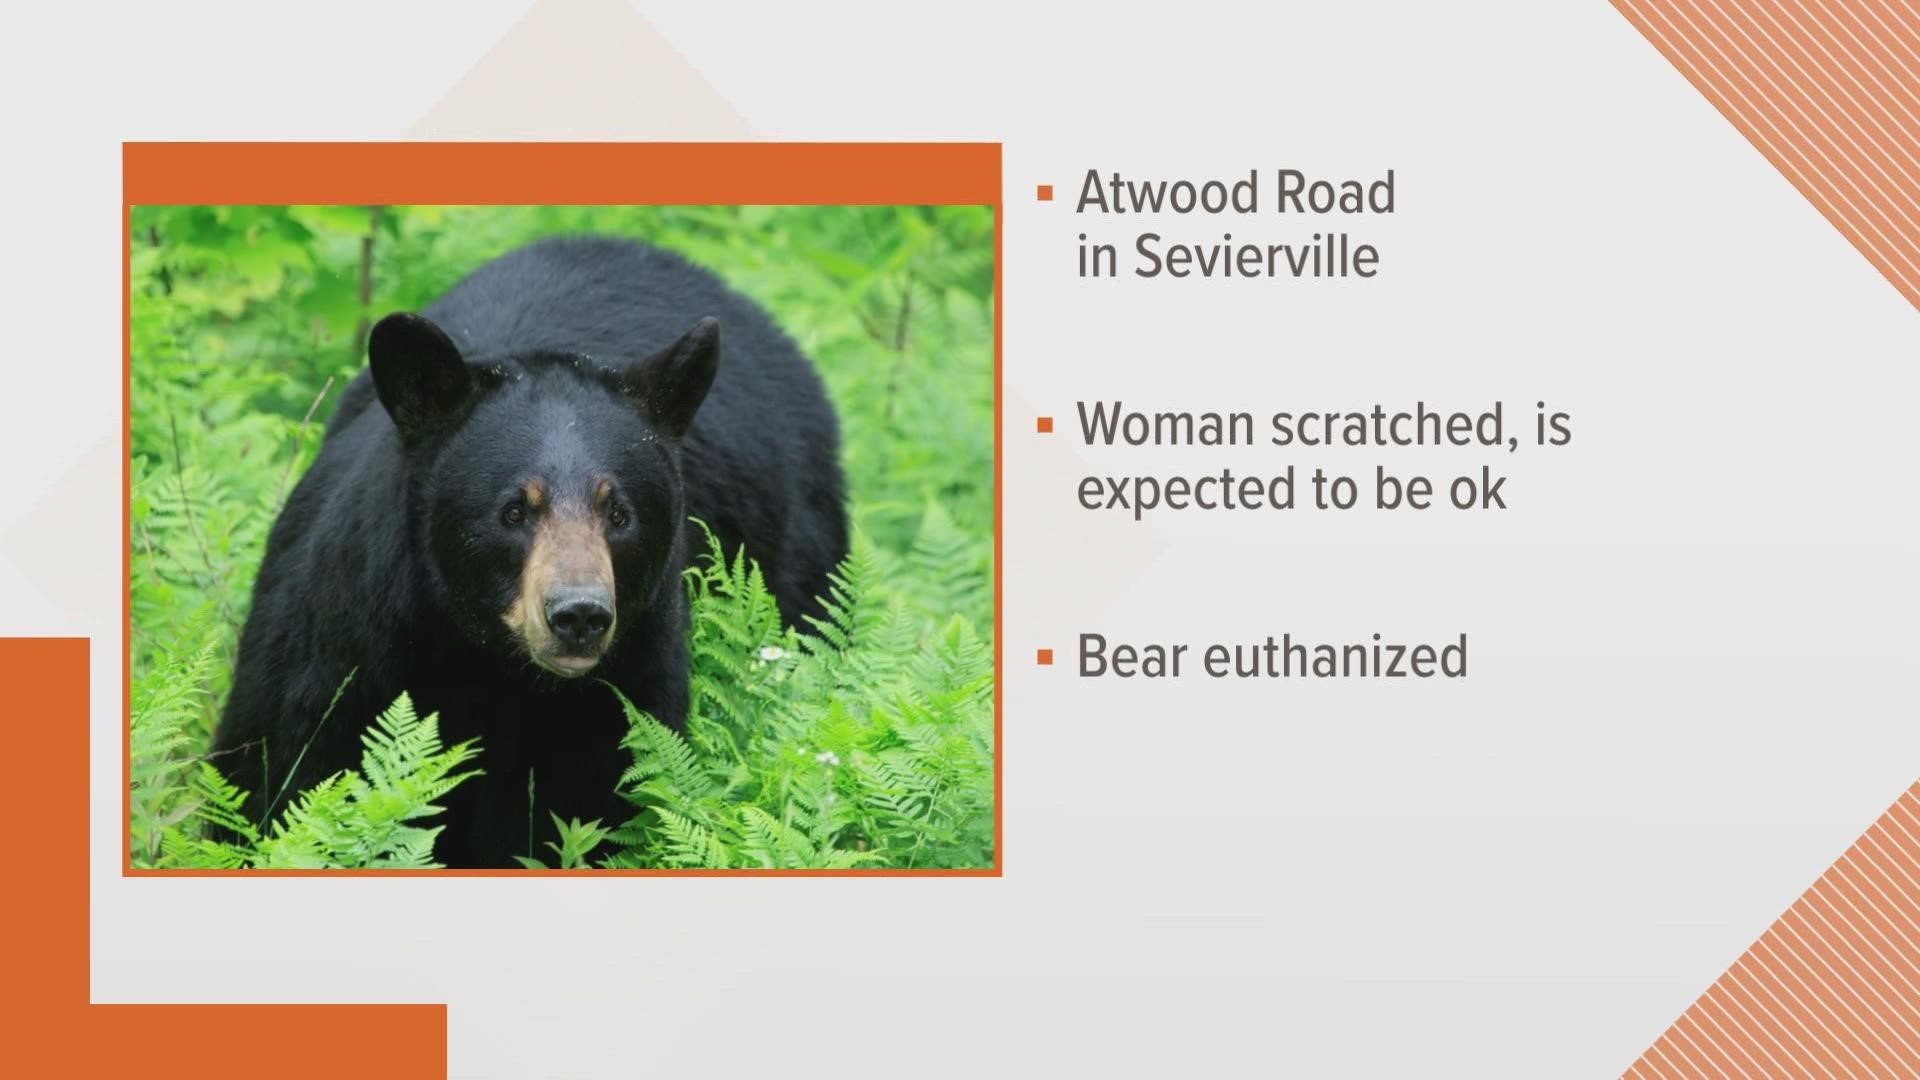 The report says the woman shook a lawn chair to try and scare the bear off.